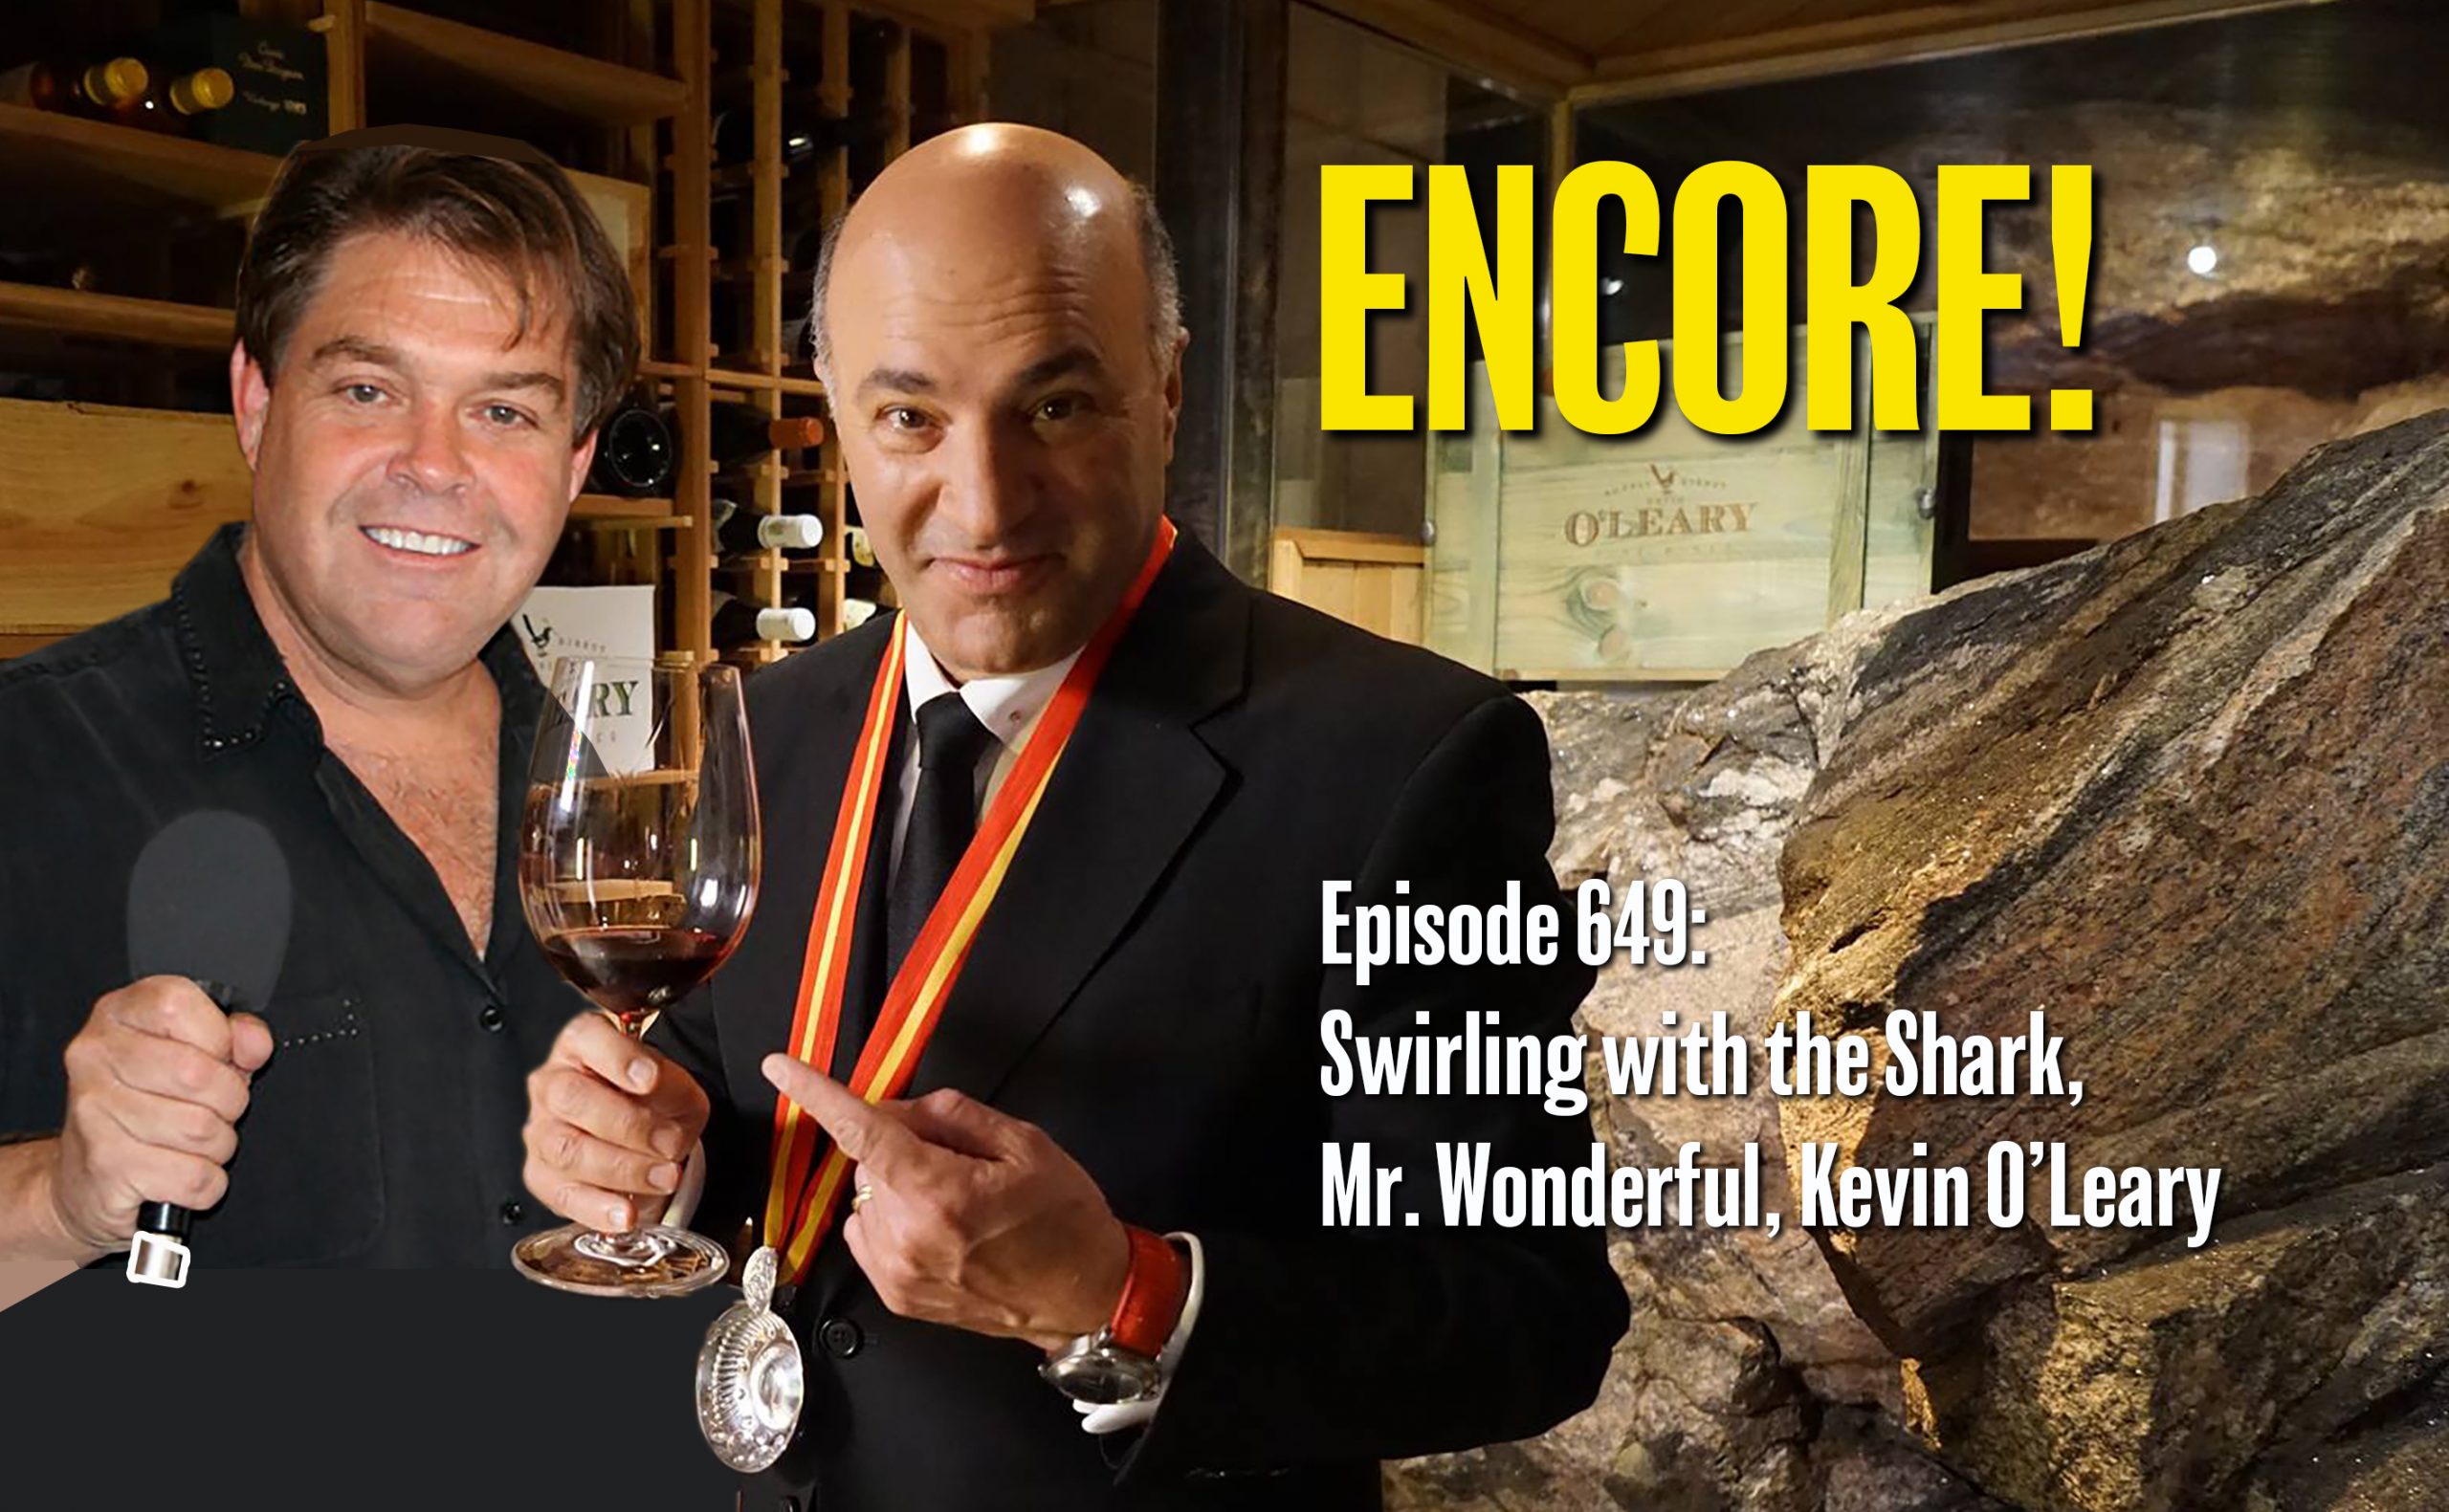 Episode #649 - ENCORE!  Swirling With the Shark, Kevin O’Leary!